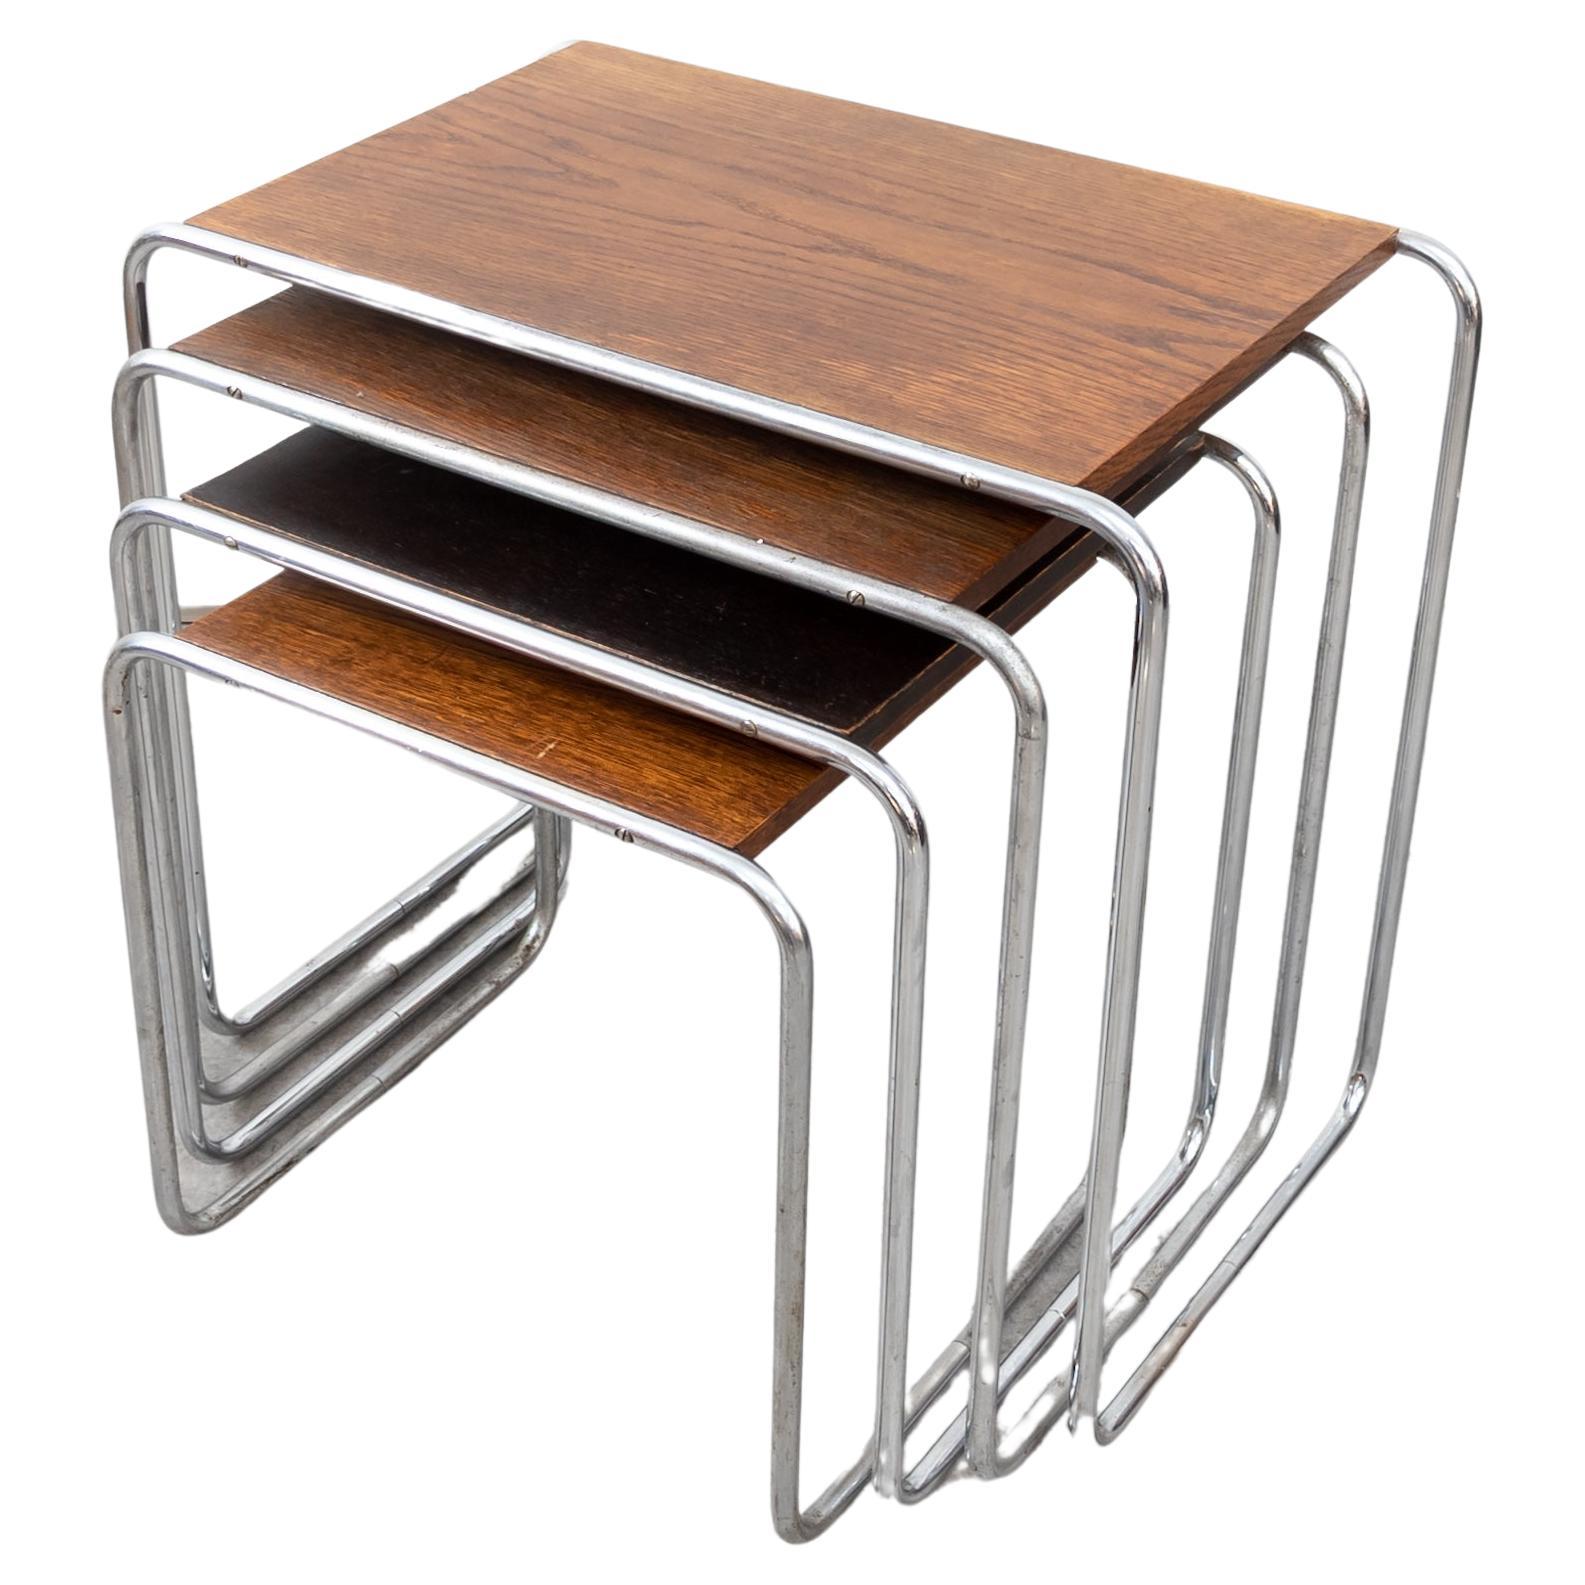 Early Thonet B 9 Nesting Tables by Marcel Breuer